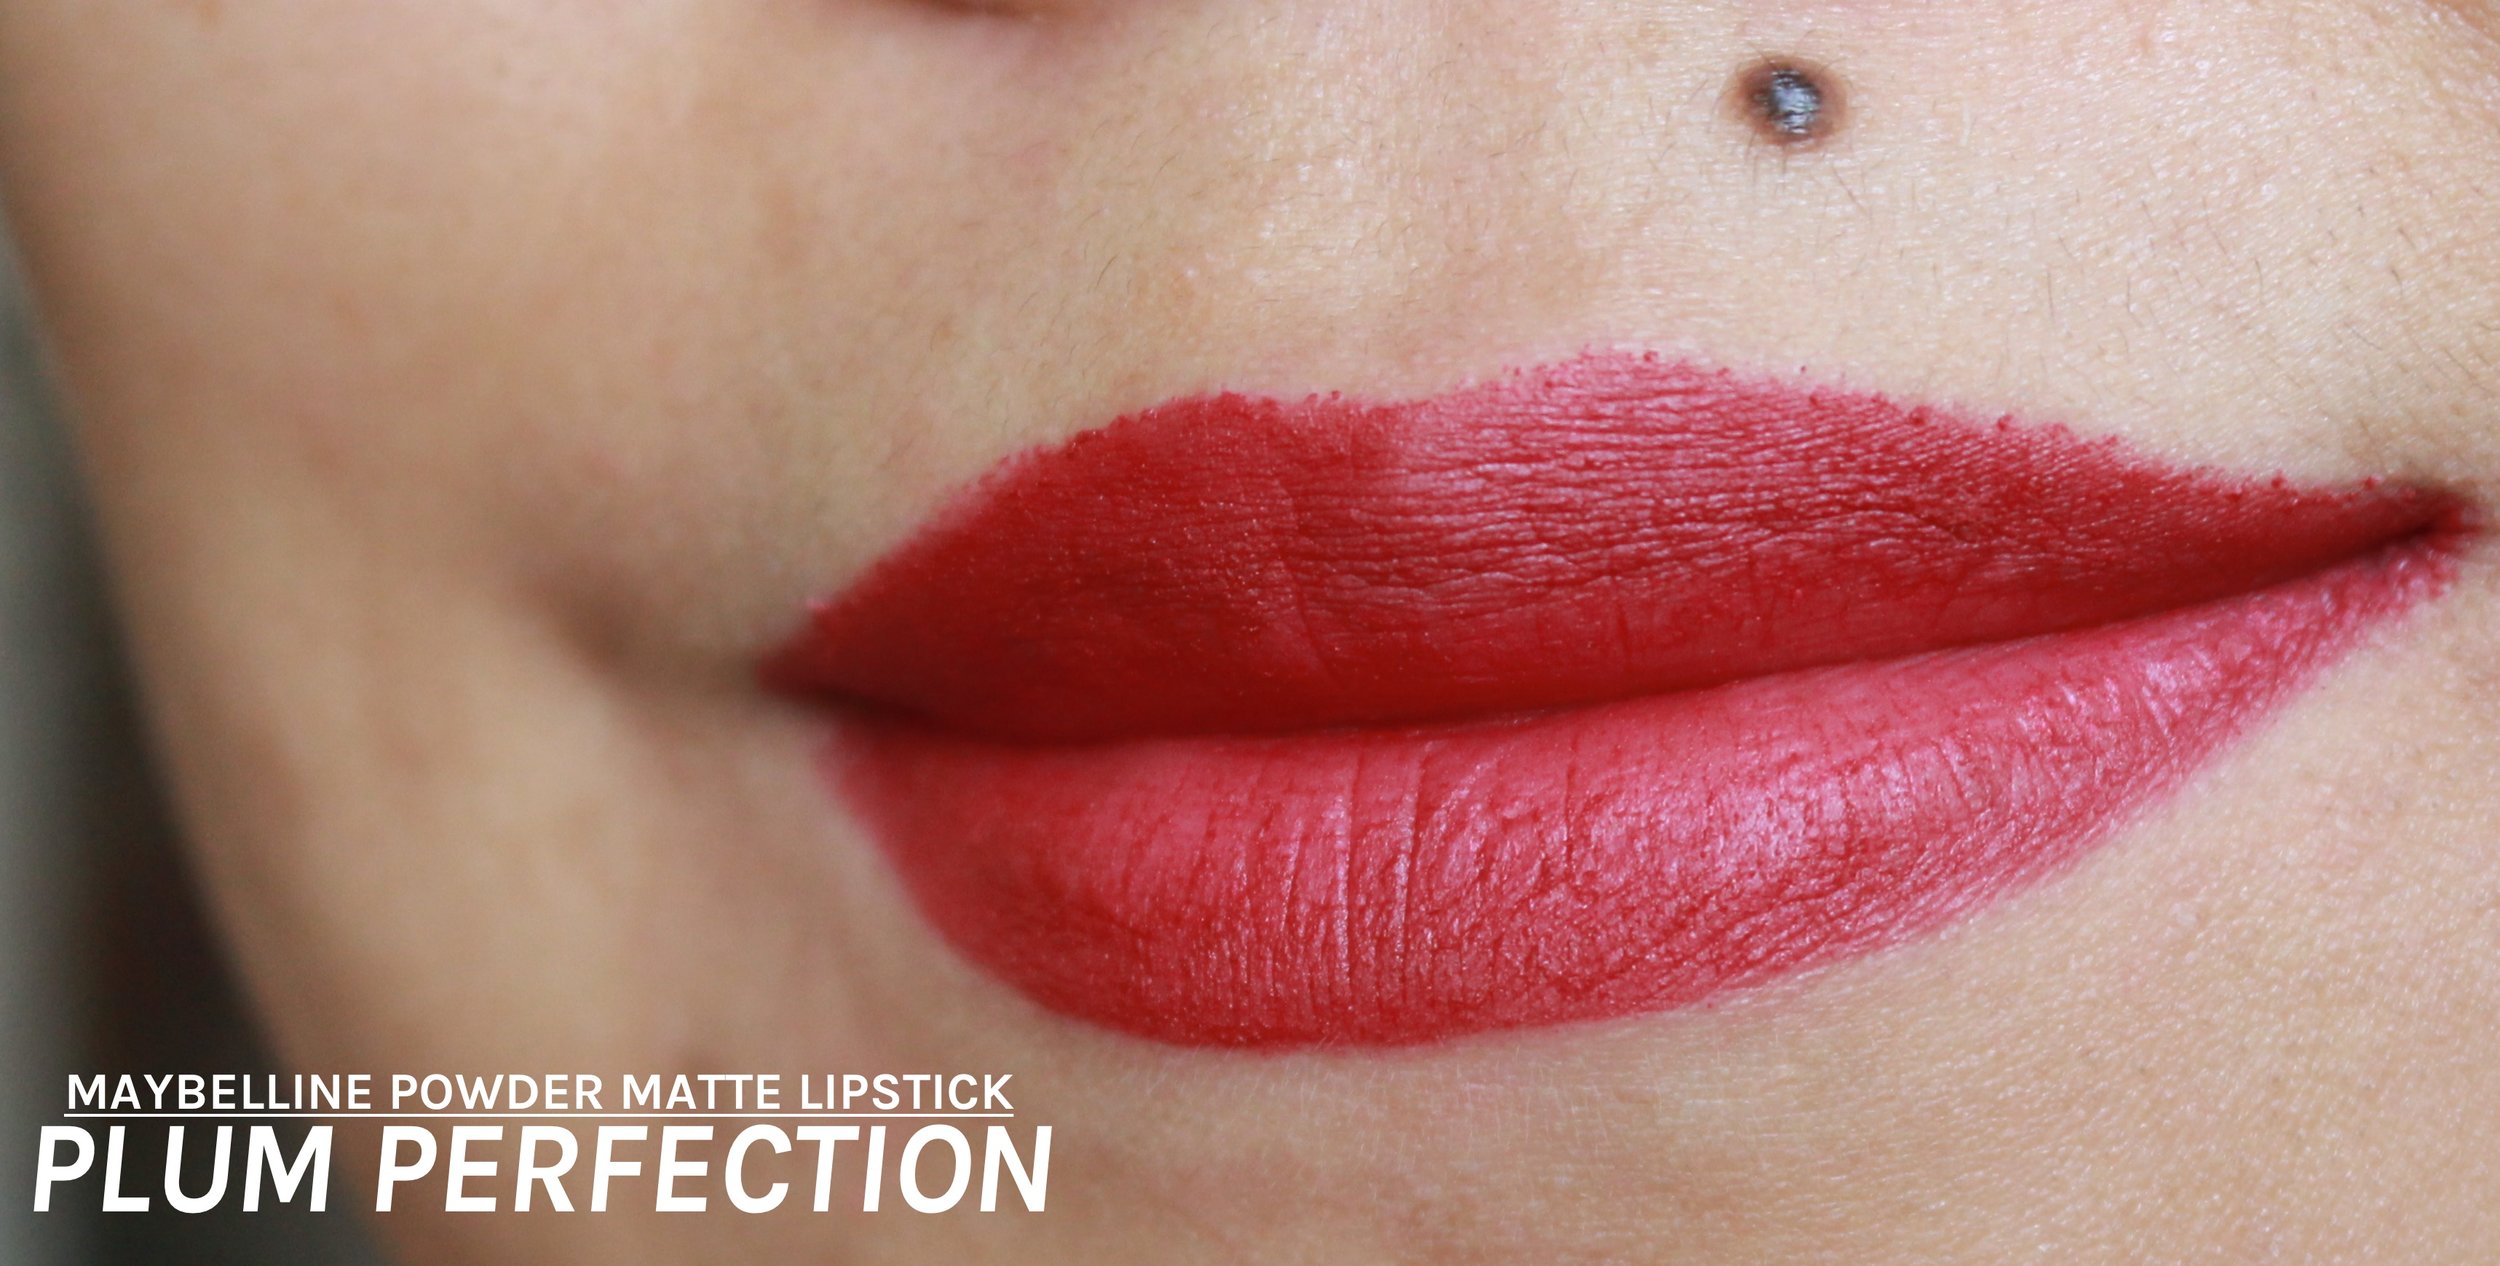 Review + Swatches: The Maybelline Powder Matte Lipstick — Project Vanity